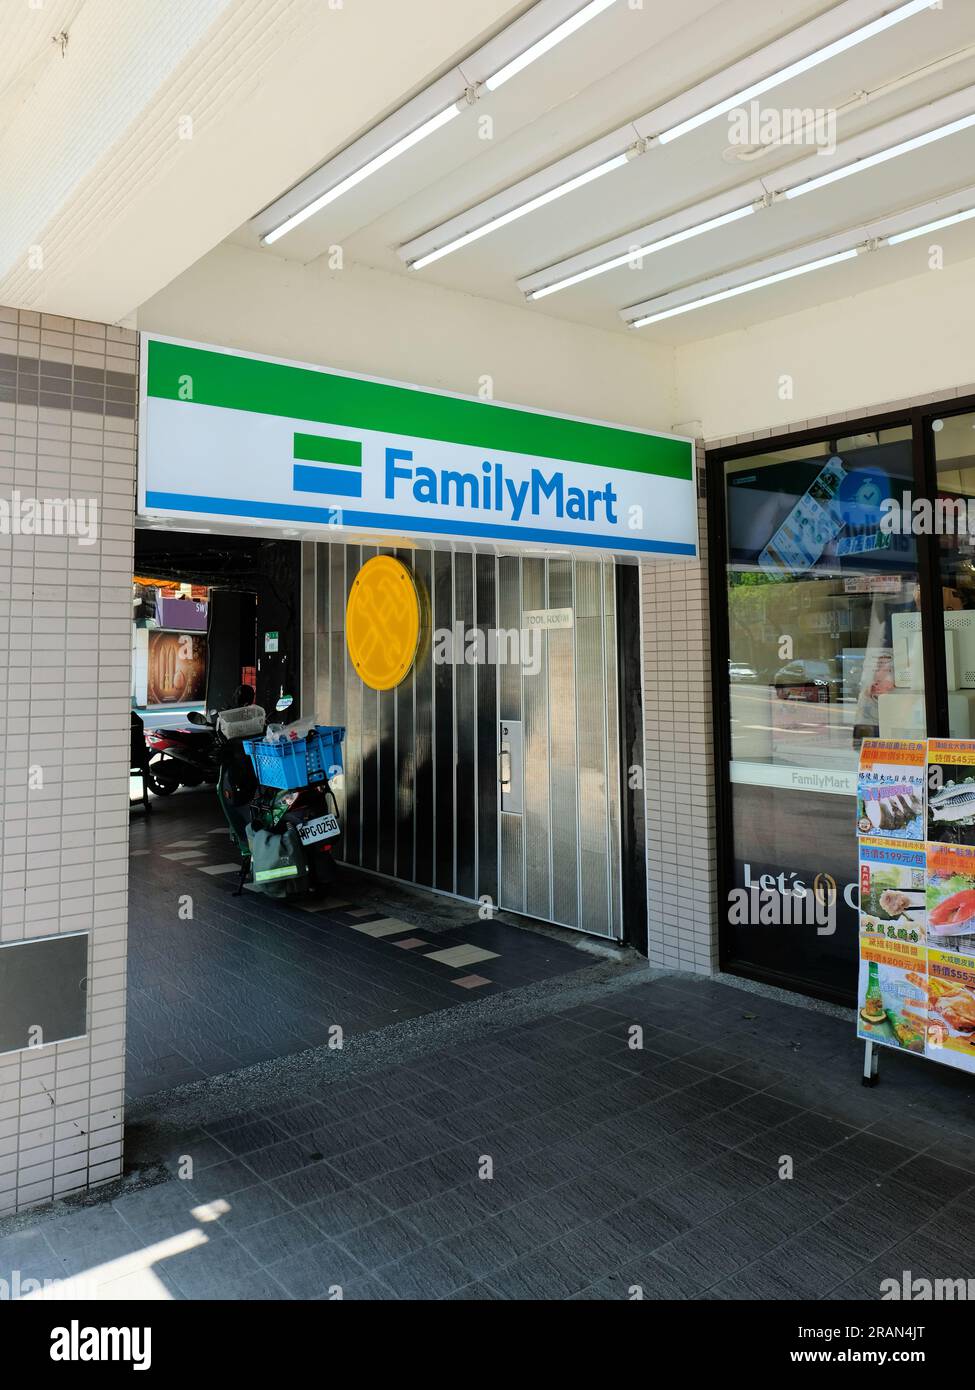 FamilyMart store branch and location in Taipei, Taiwan; a Japanese convenience store franchise chain with locations throughout Asia. Stock Photo